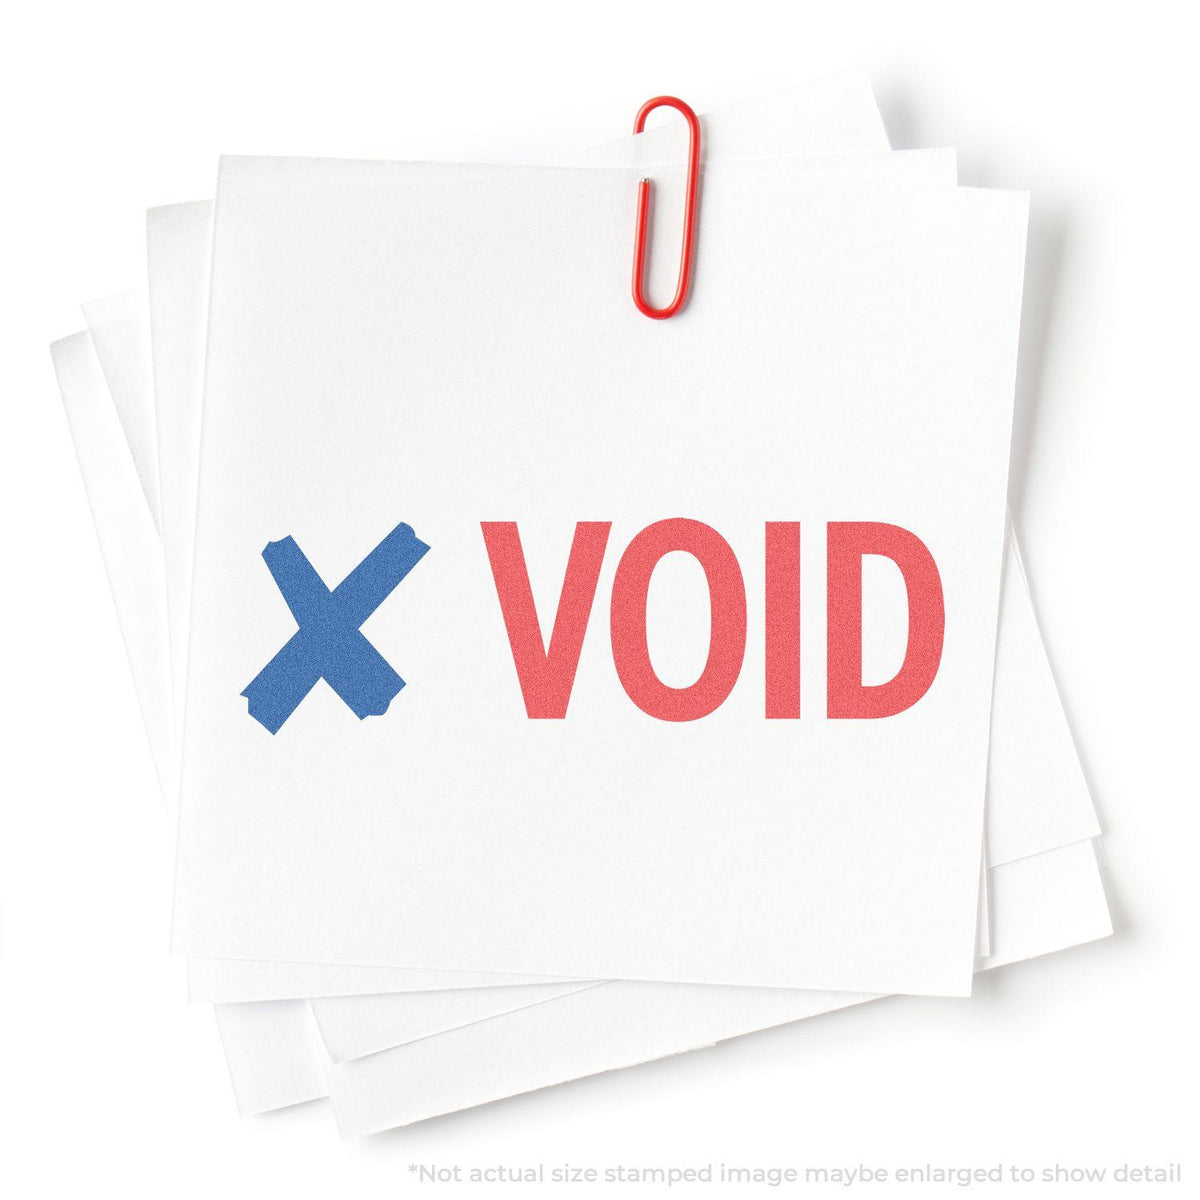 In Use Photo of Two-color Void Xstamper Stamp